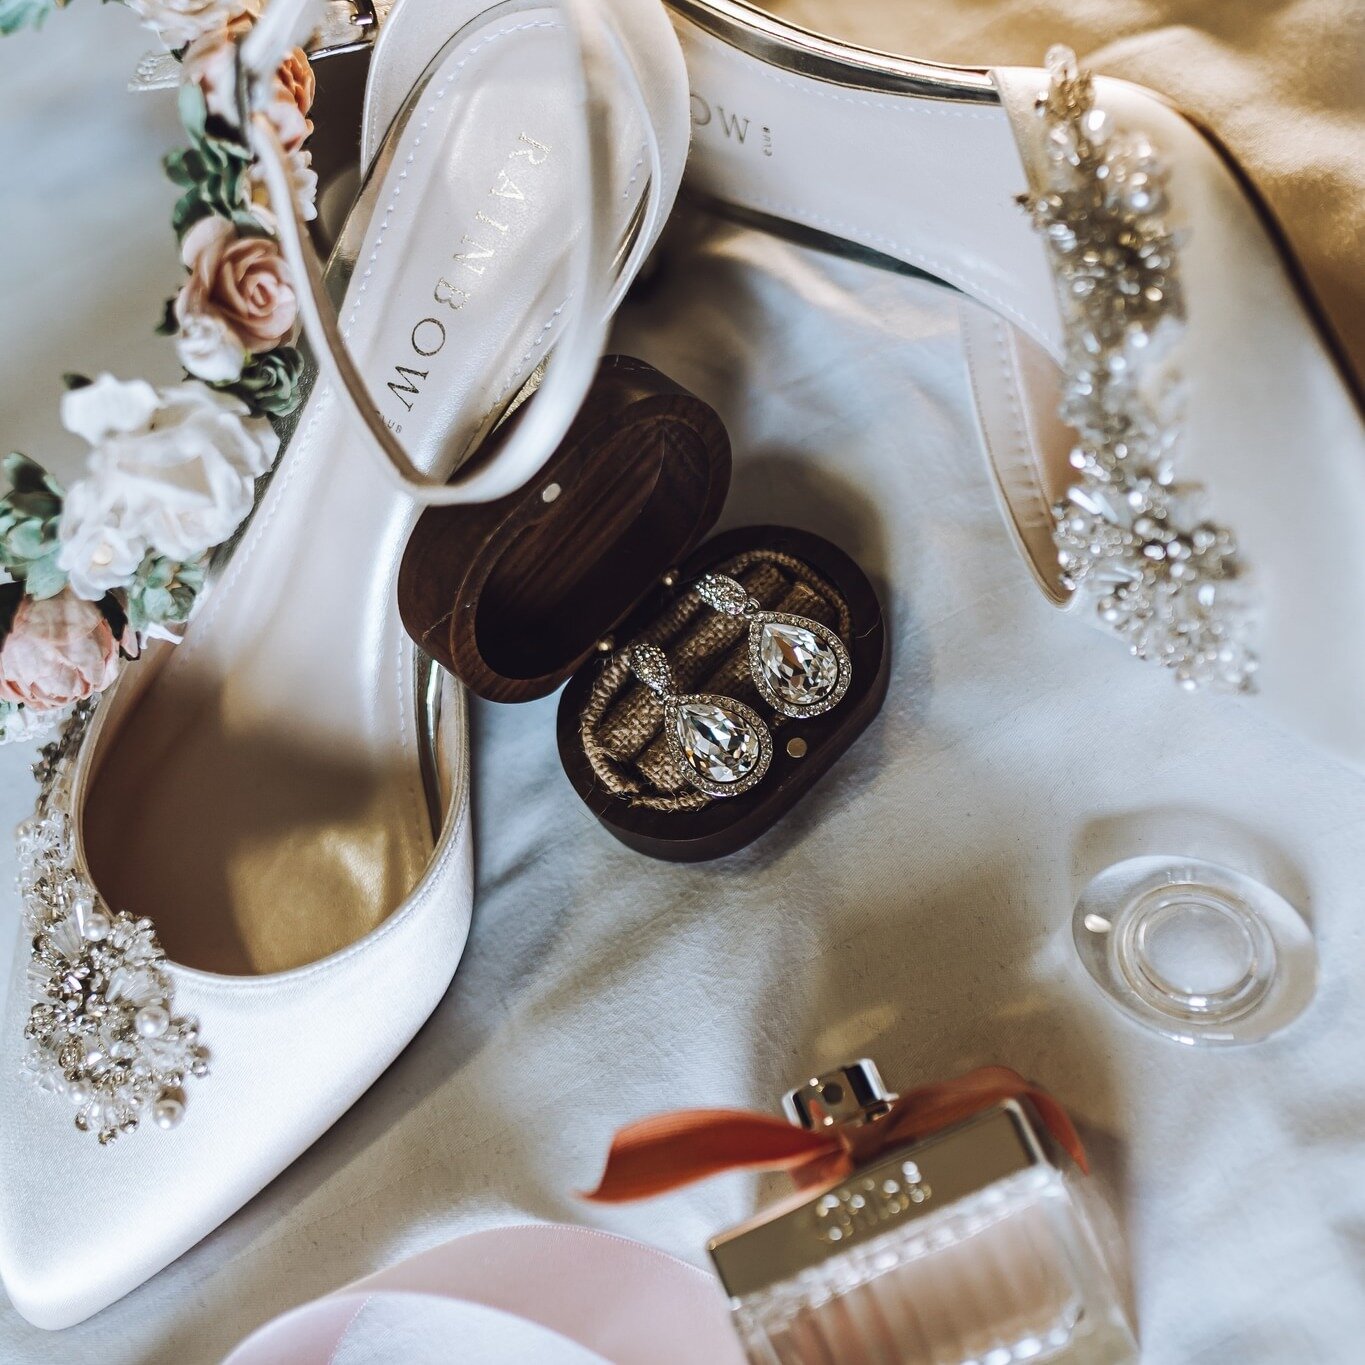 Wedding Traditions

What is a wedding tradition to you?
Would you like to follow any?
Would you like to start your own?

All these questions are to start a discussion...So you can pause, reflect and decide For Yourself...What do you like..

Today I w